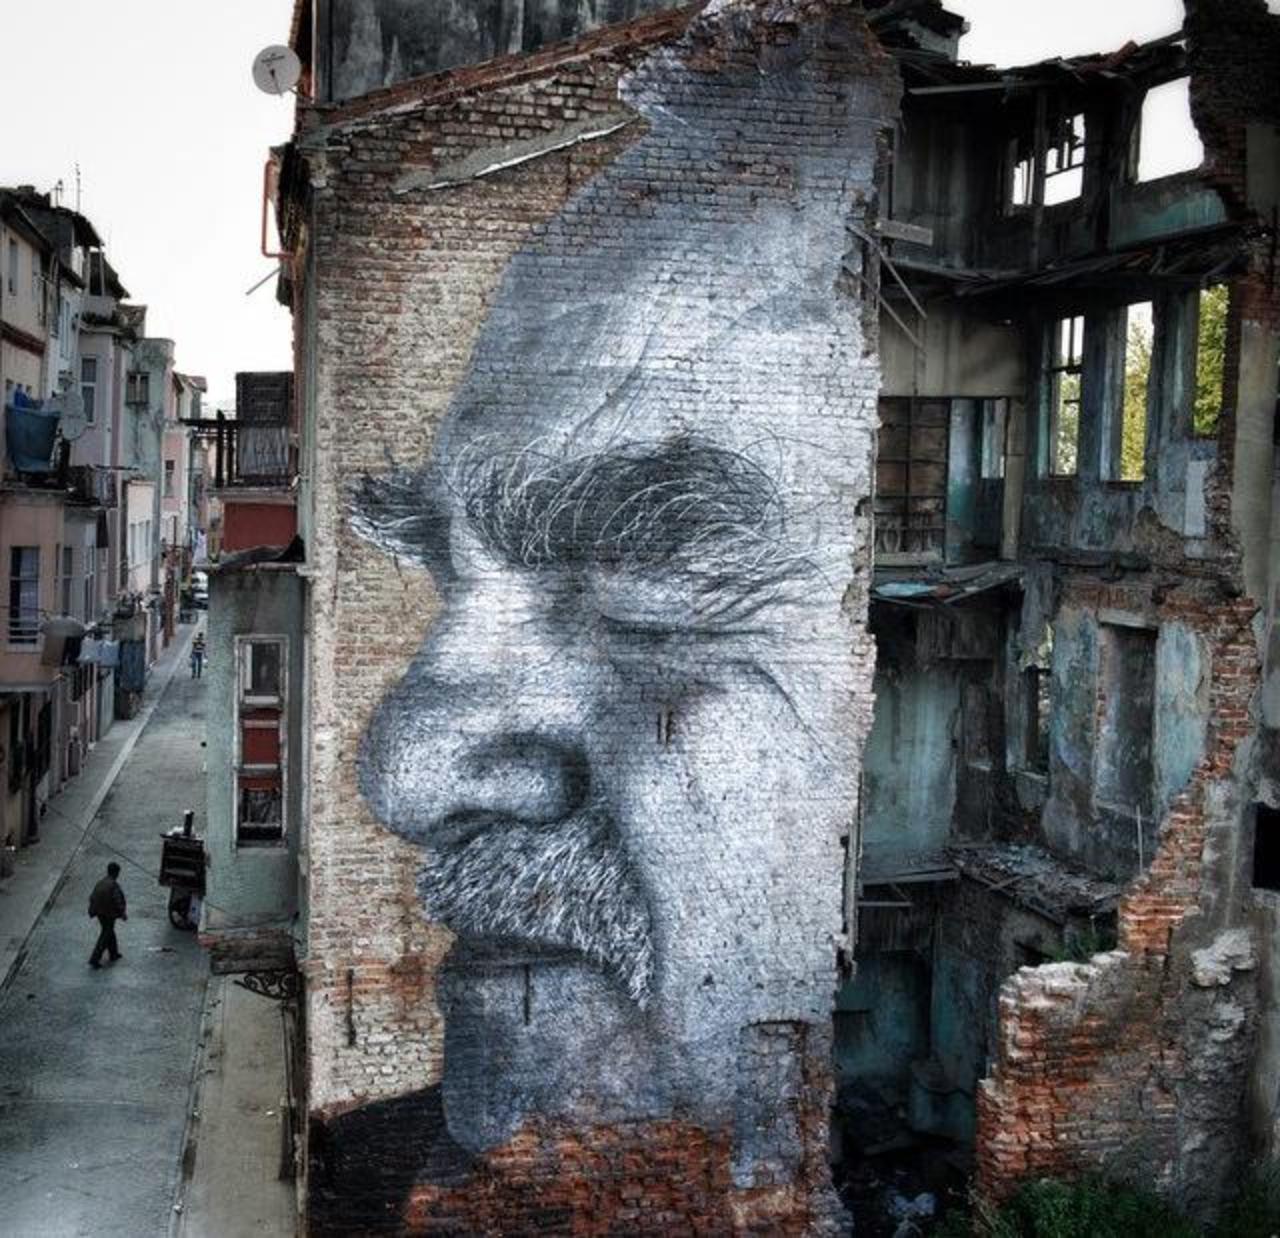 Street Art by JR in Istanbul & after local police painted over it 

#art #arte #graffiti #streetart http://t.co/QuqoXxEZTE